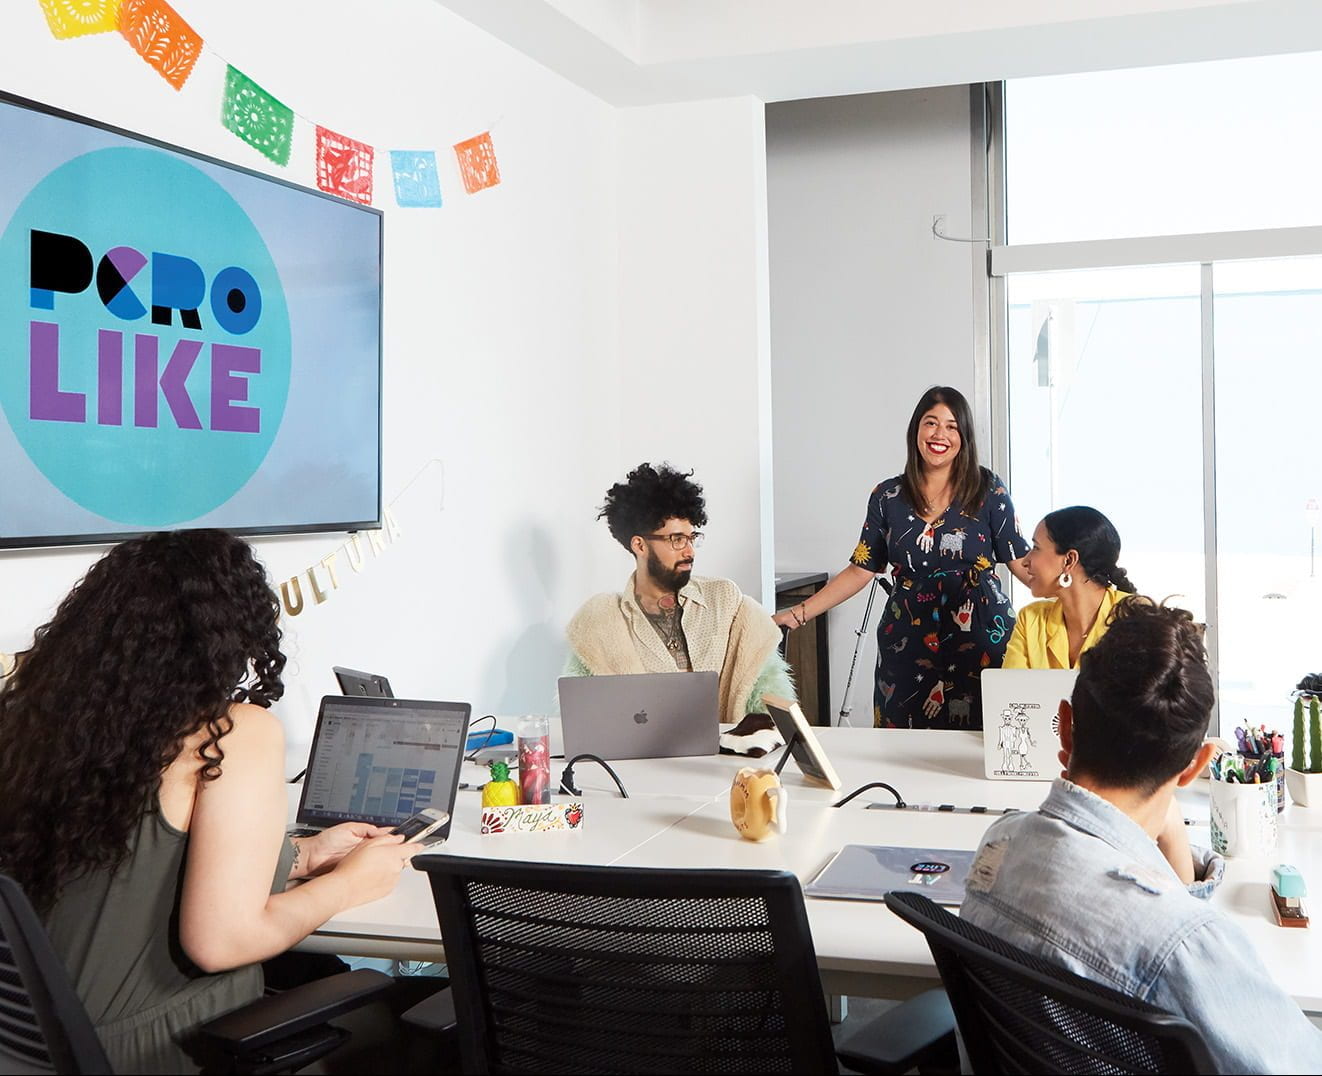 Alexis Tirado '02 with her team at BuzzFeed in Los Angeles. She is supervising producer for Pero Like, the Latino brand at the digital media company.